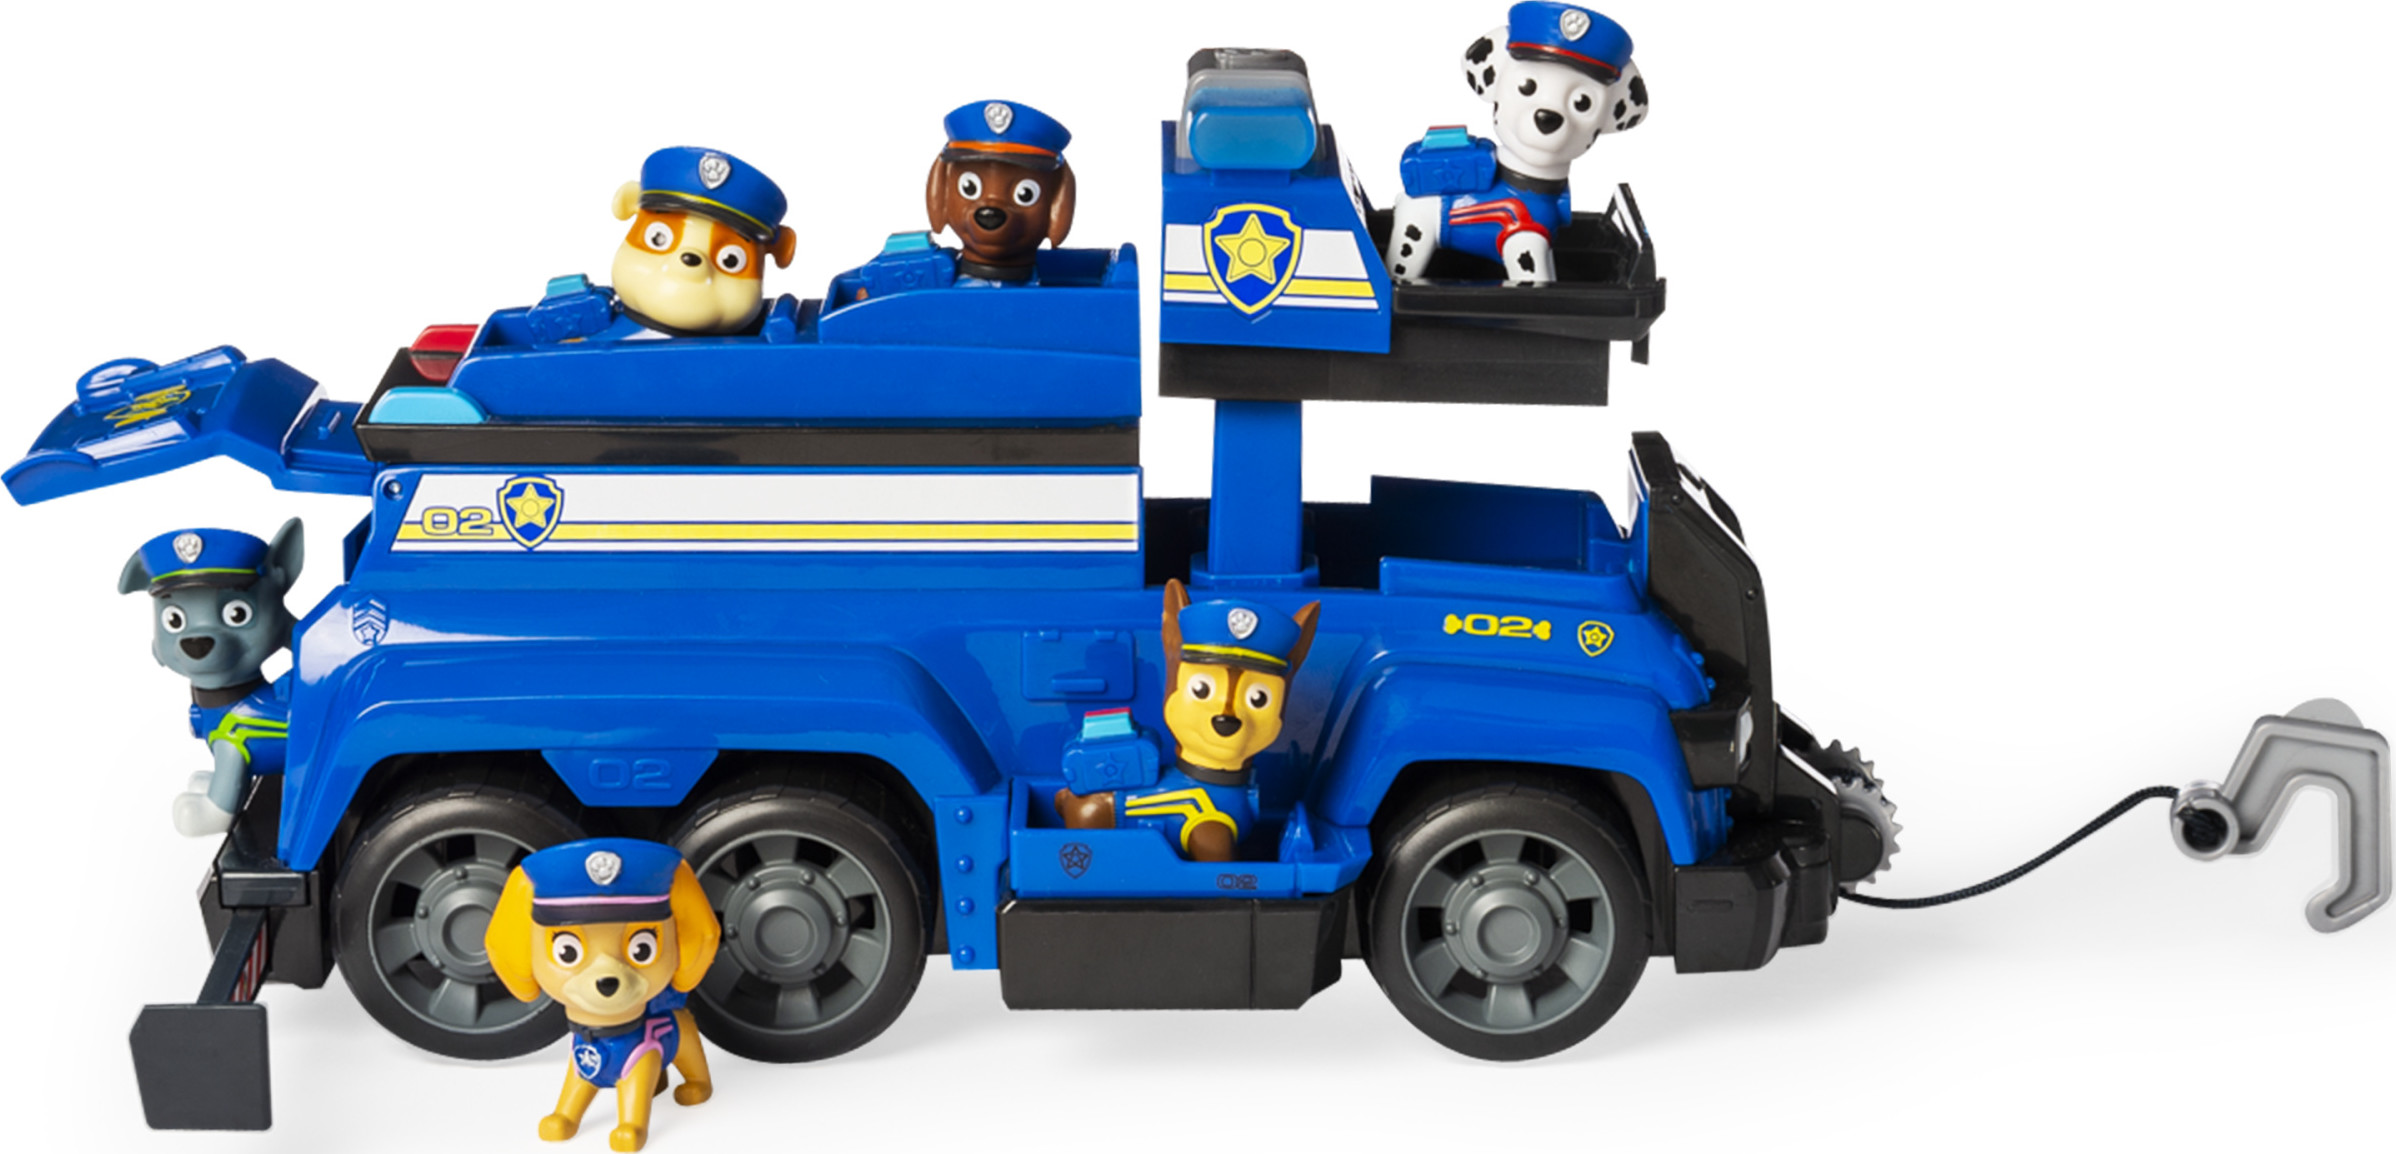 PAW Patrol, Chase’s Total Team Rescue Police Cruiser Vehicle with 6 Pups, for Kids Aged 3 and Up - image 4 of 8